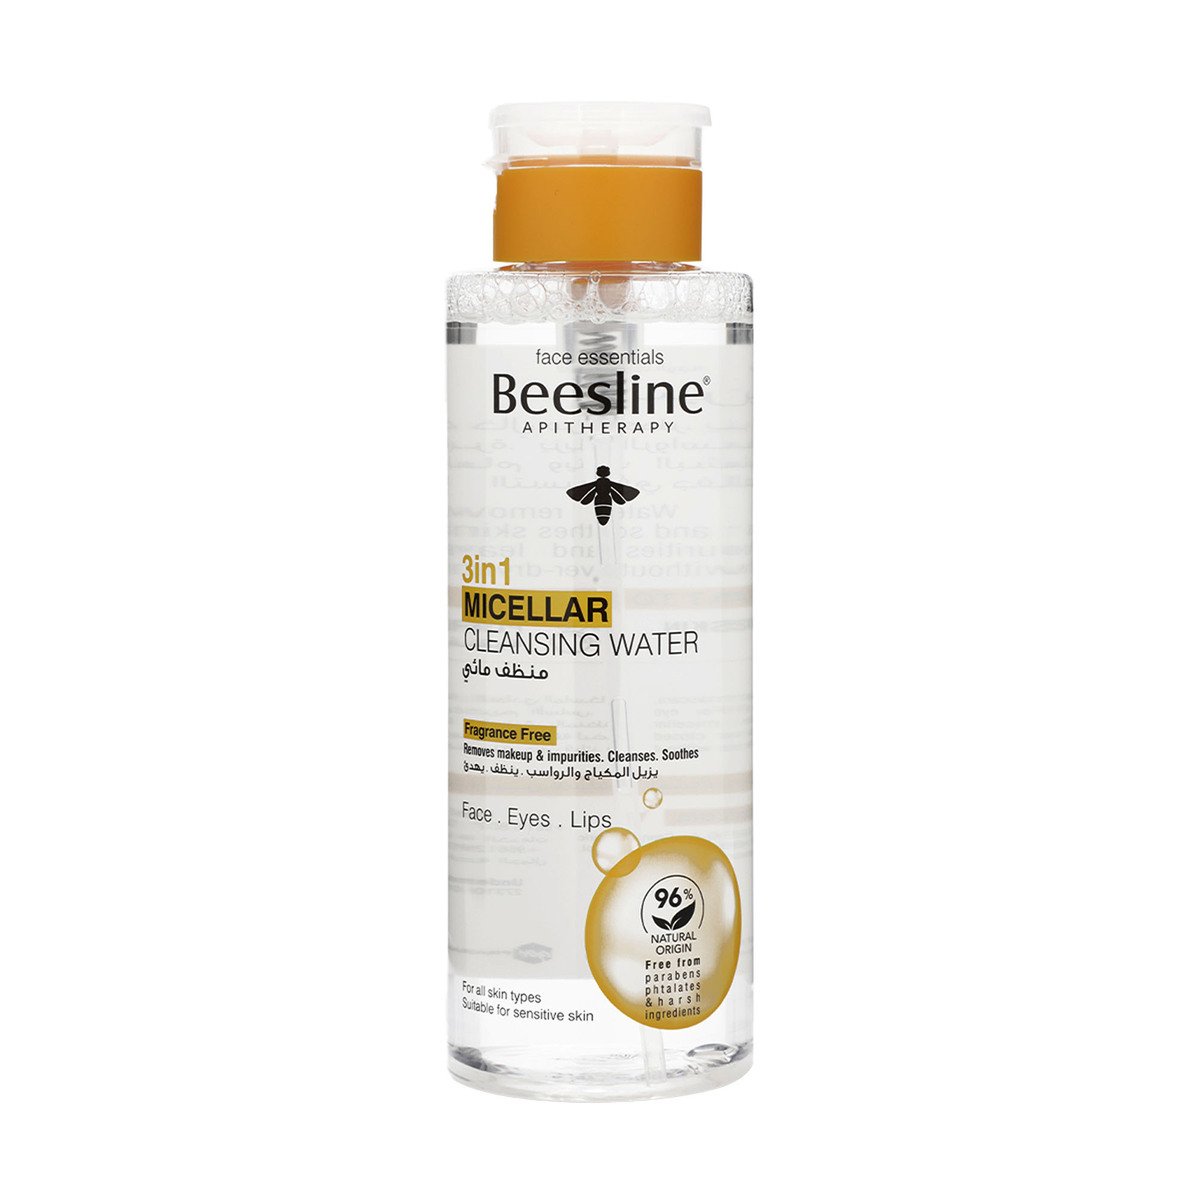 Beesline Apitherapy 3in1 Micellar Cleansing Water 400 ml